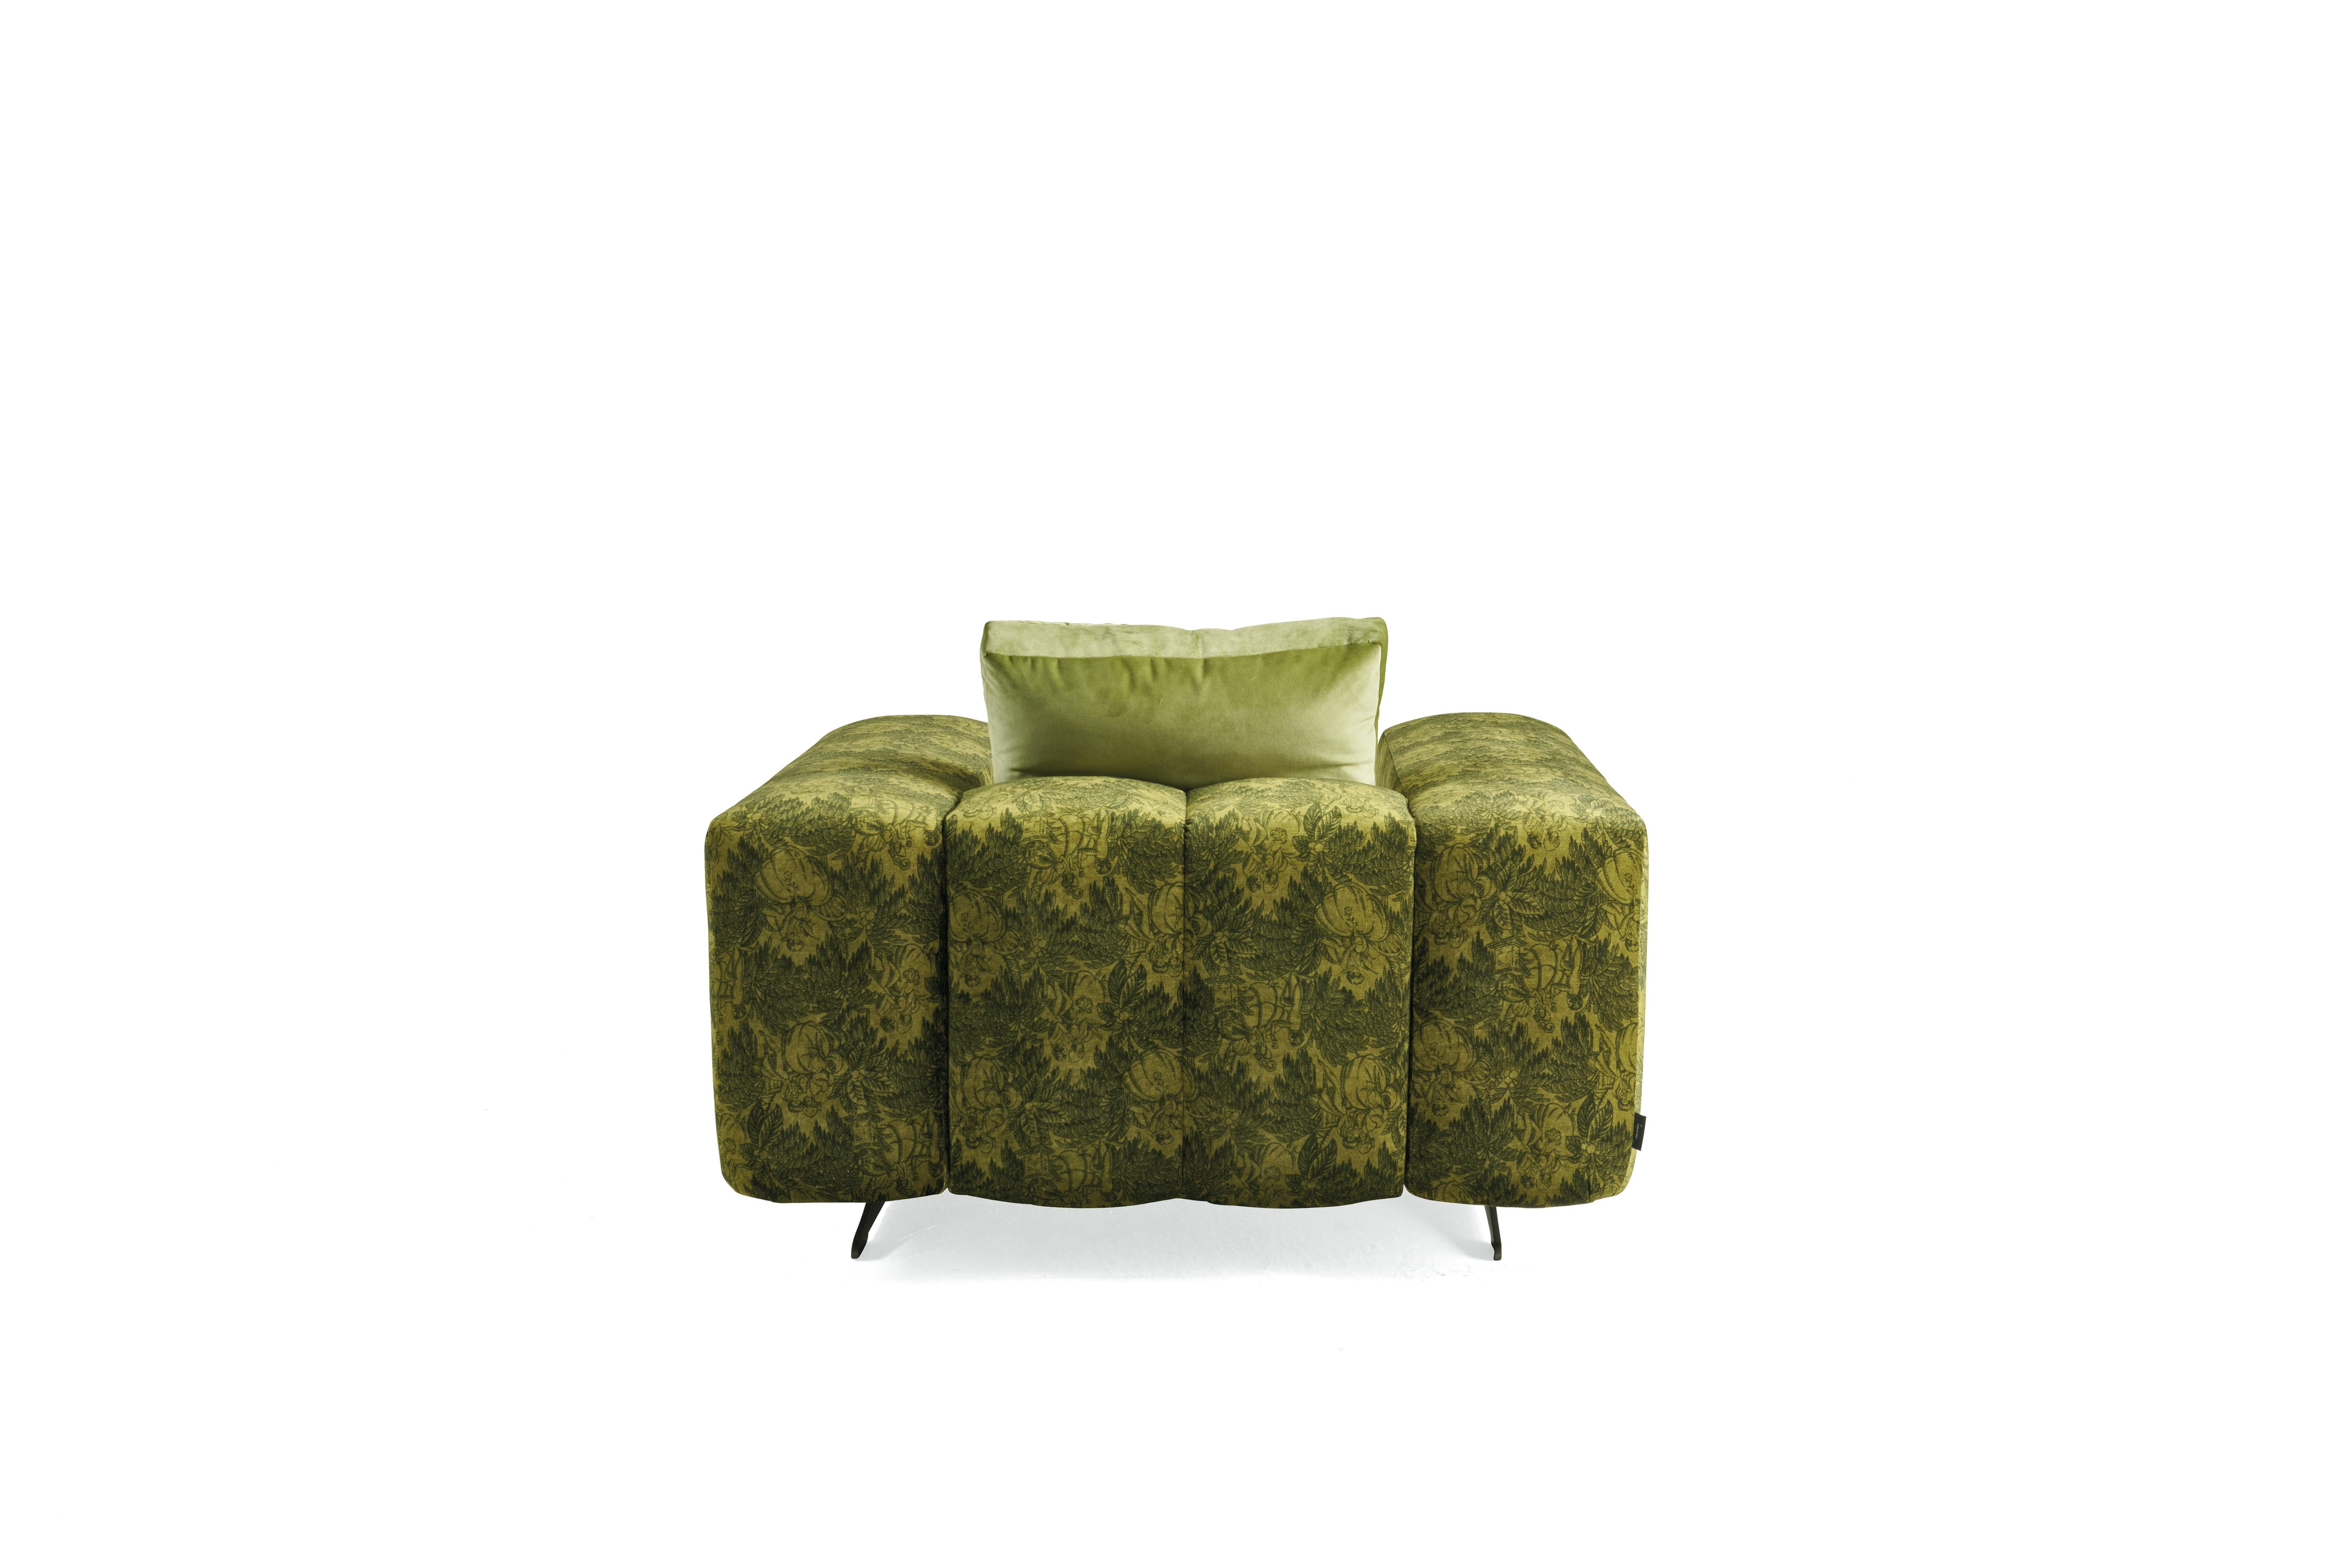 Contemporary 21st Century Ratio Up Armchair in Green Velvet by Etro Home Interiors For Sale